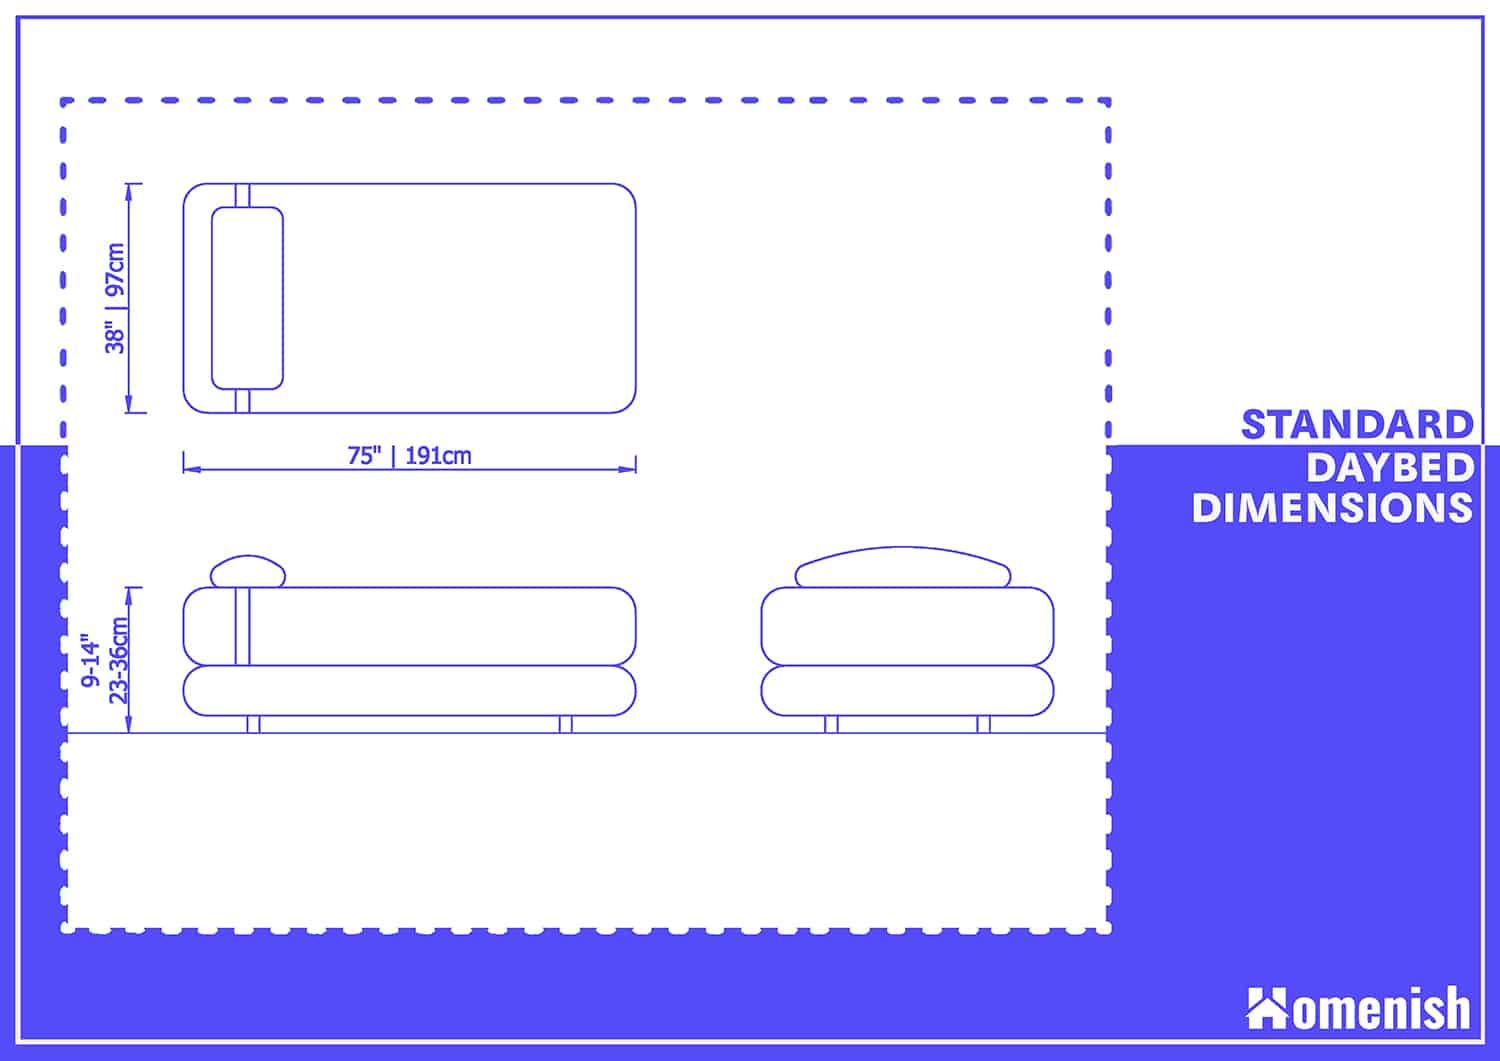 Standard Daybed Dimensions